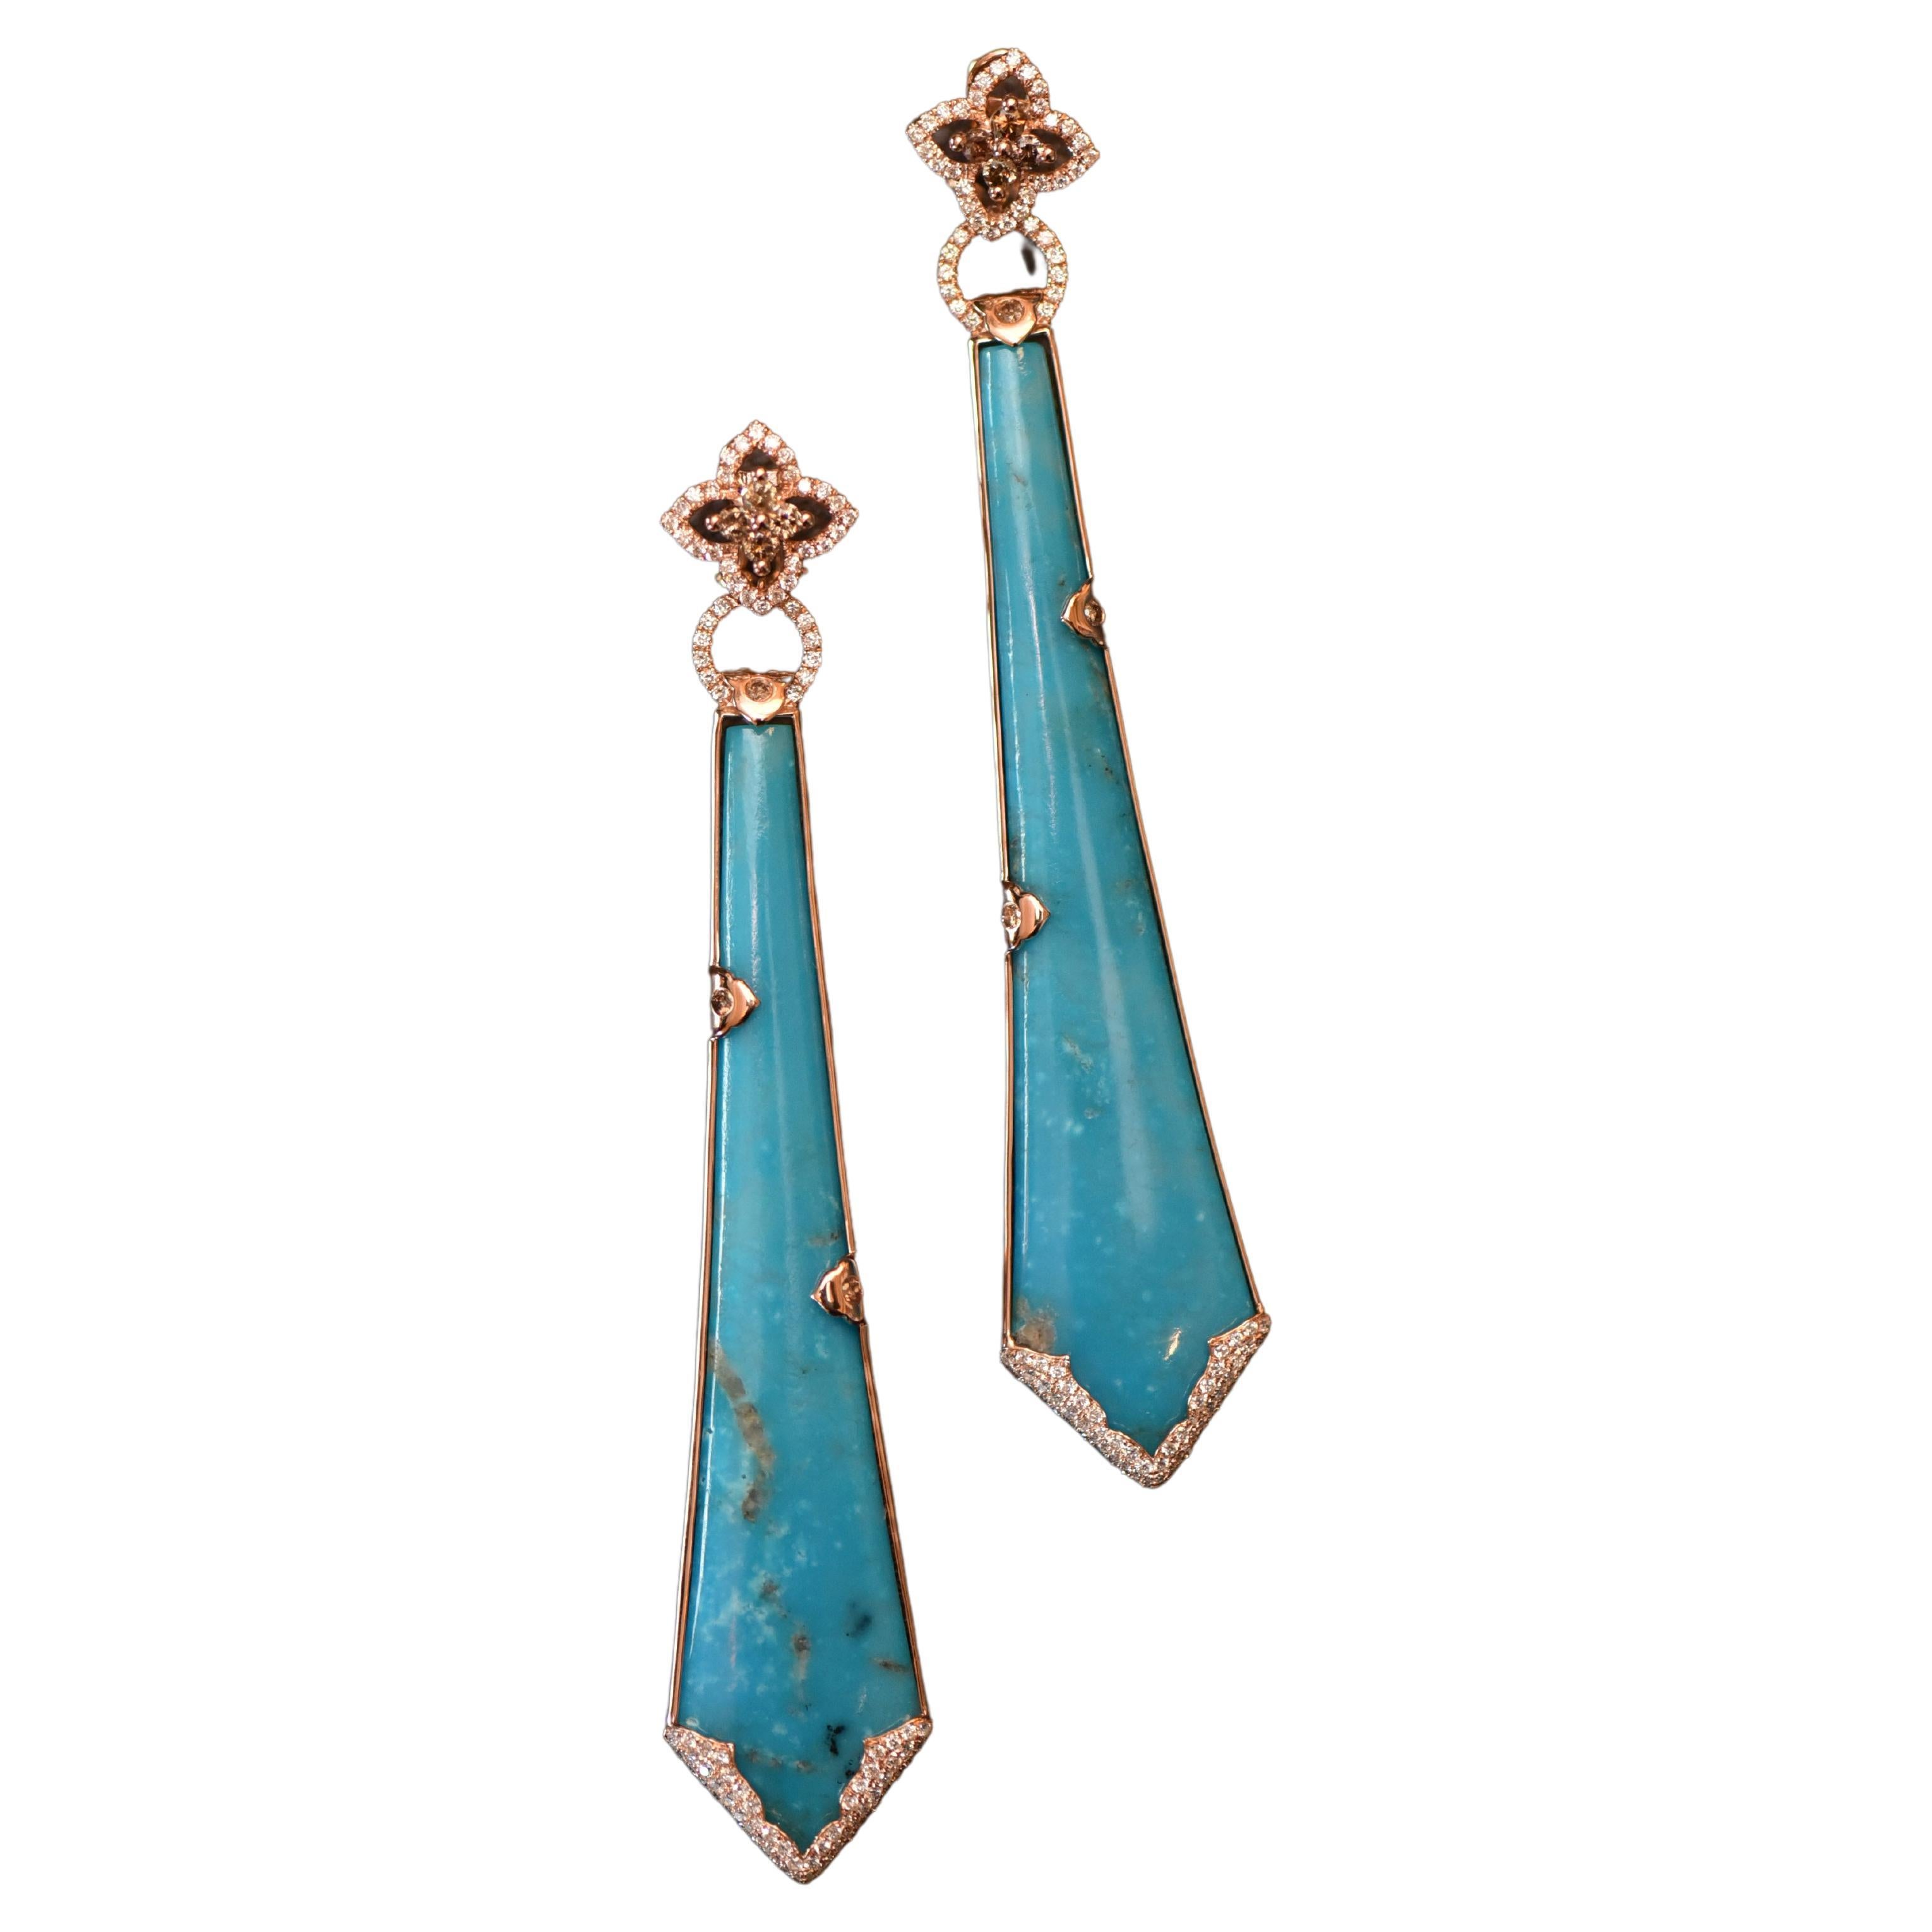 Bochic Persian vintage turquoise earrings in 18 Karat gold and diamonds. 
Perfect summer beach day or night accessory. 
Pink 18 K gold. 
Cognac and white Diamonds. 
1.12 Carats. 
Perfect summer beach day or night accessory. 
measures apx. 6-1/2